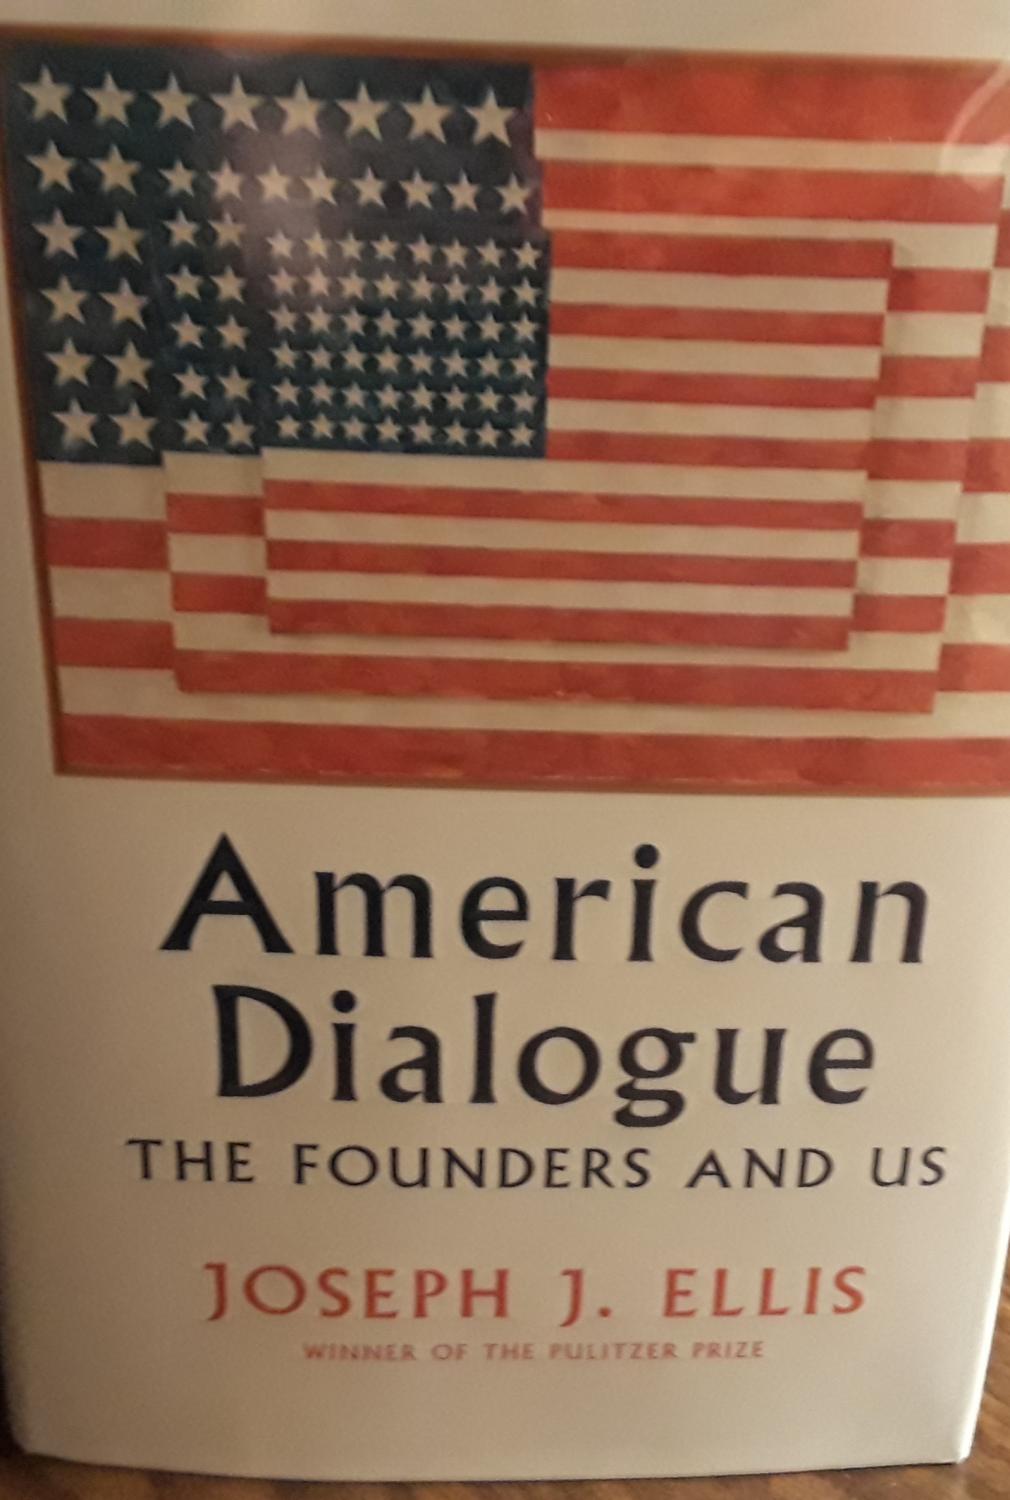 American dialogue the founders and us by joseph j ellis American Dialogue The Founders And Us Signed First Edition By Ellis Joseph New Hardcover 2018 1st Edition Signed By Author S Margins13 Books